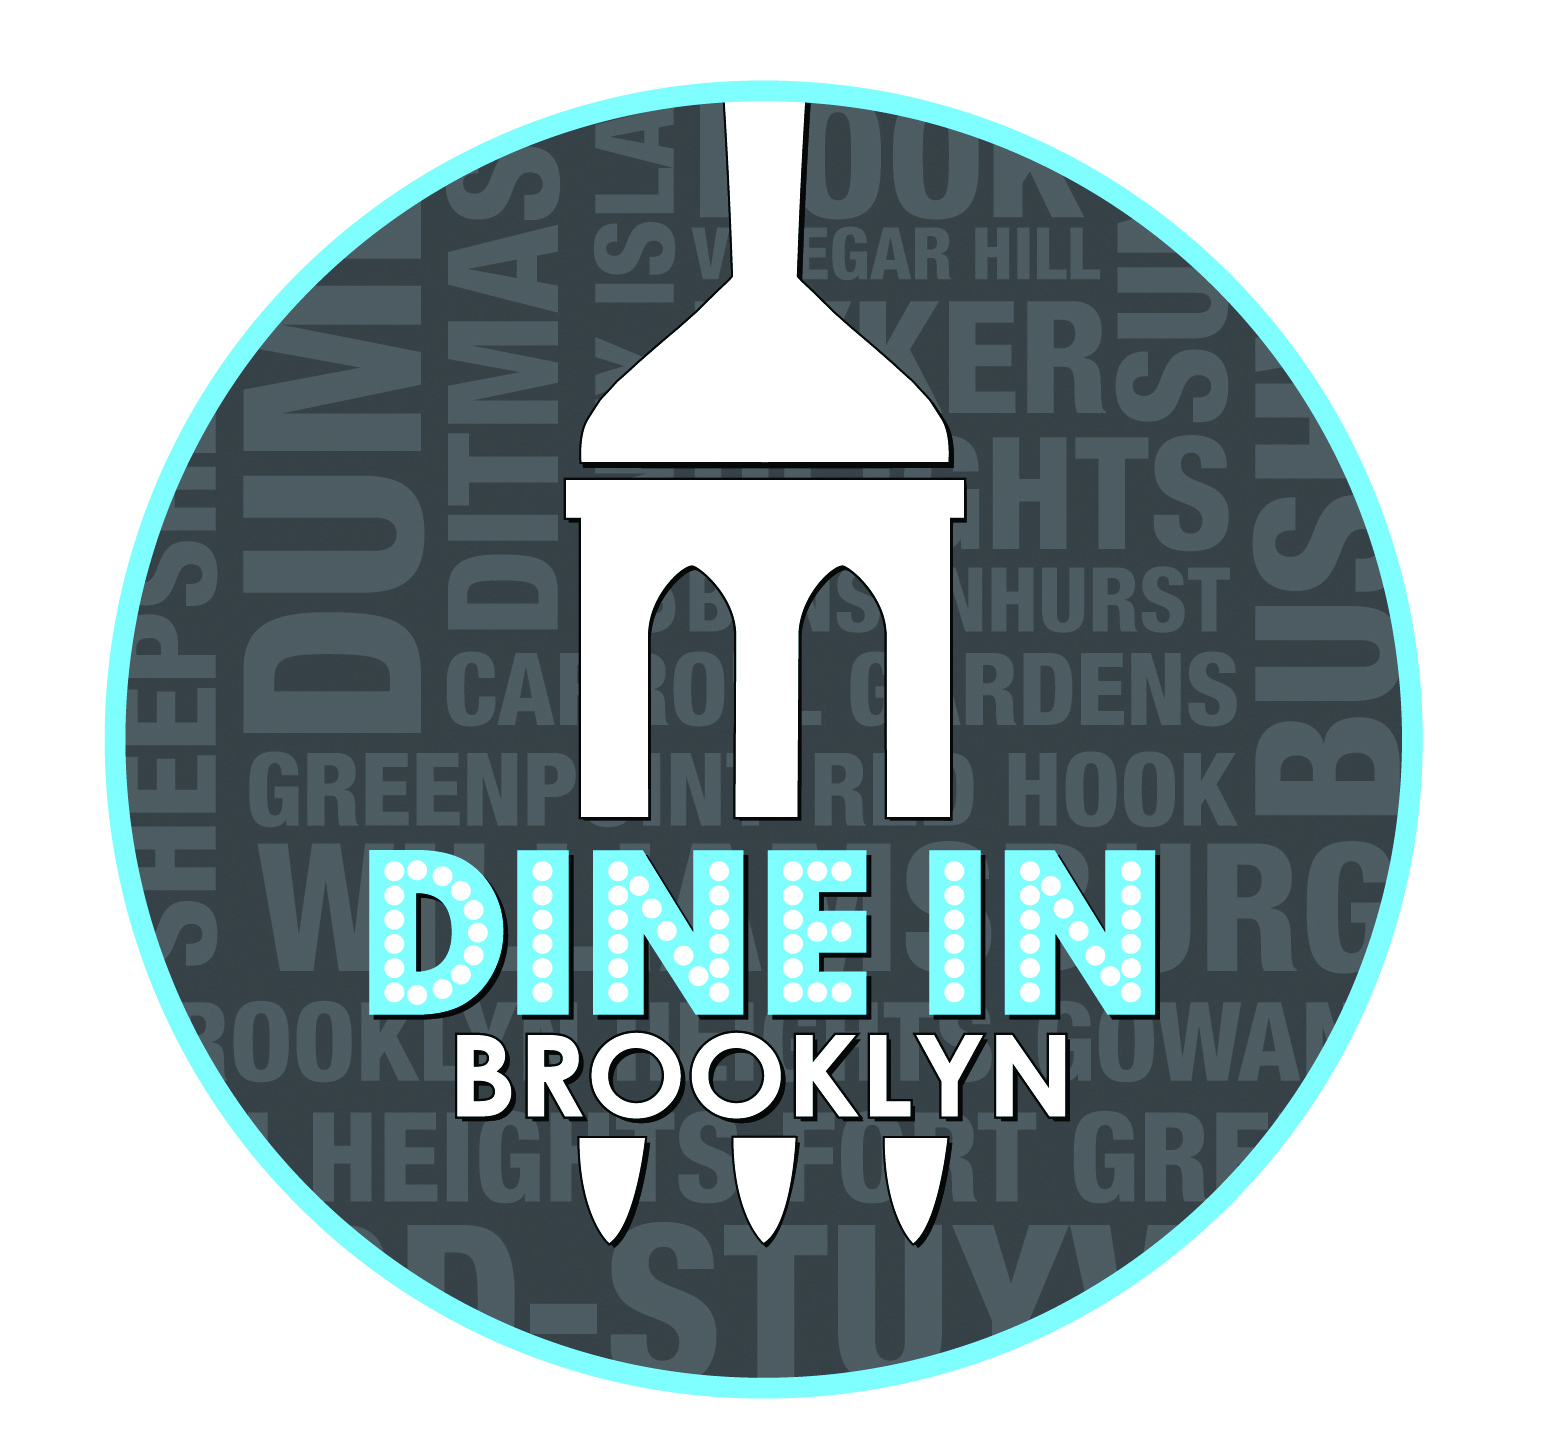 Get ready to dig in Brooklyn Restaurant Week is returning The